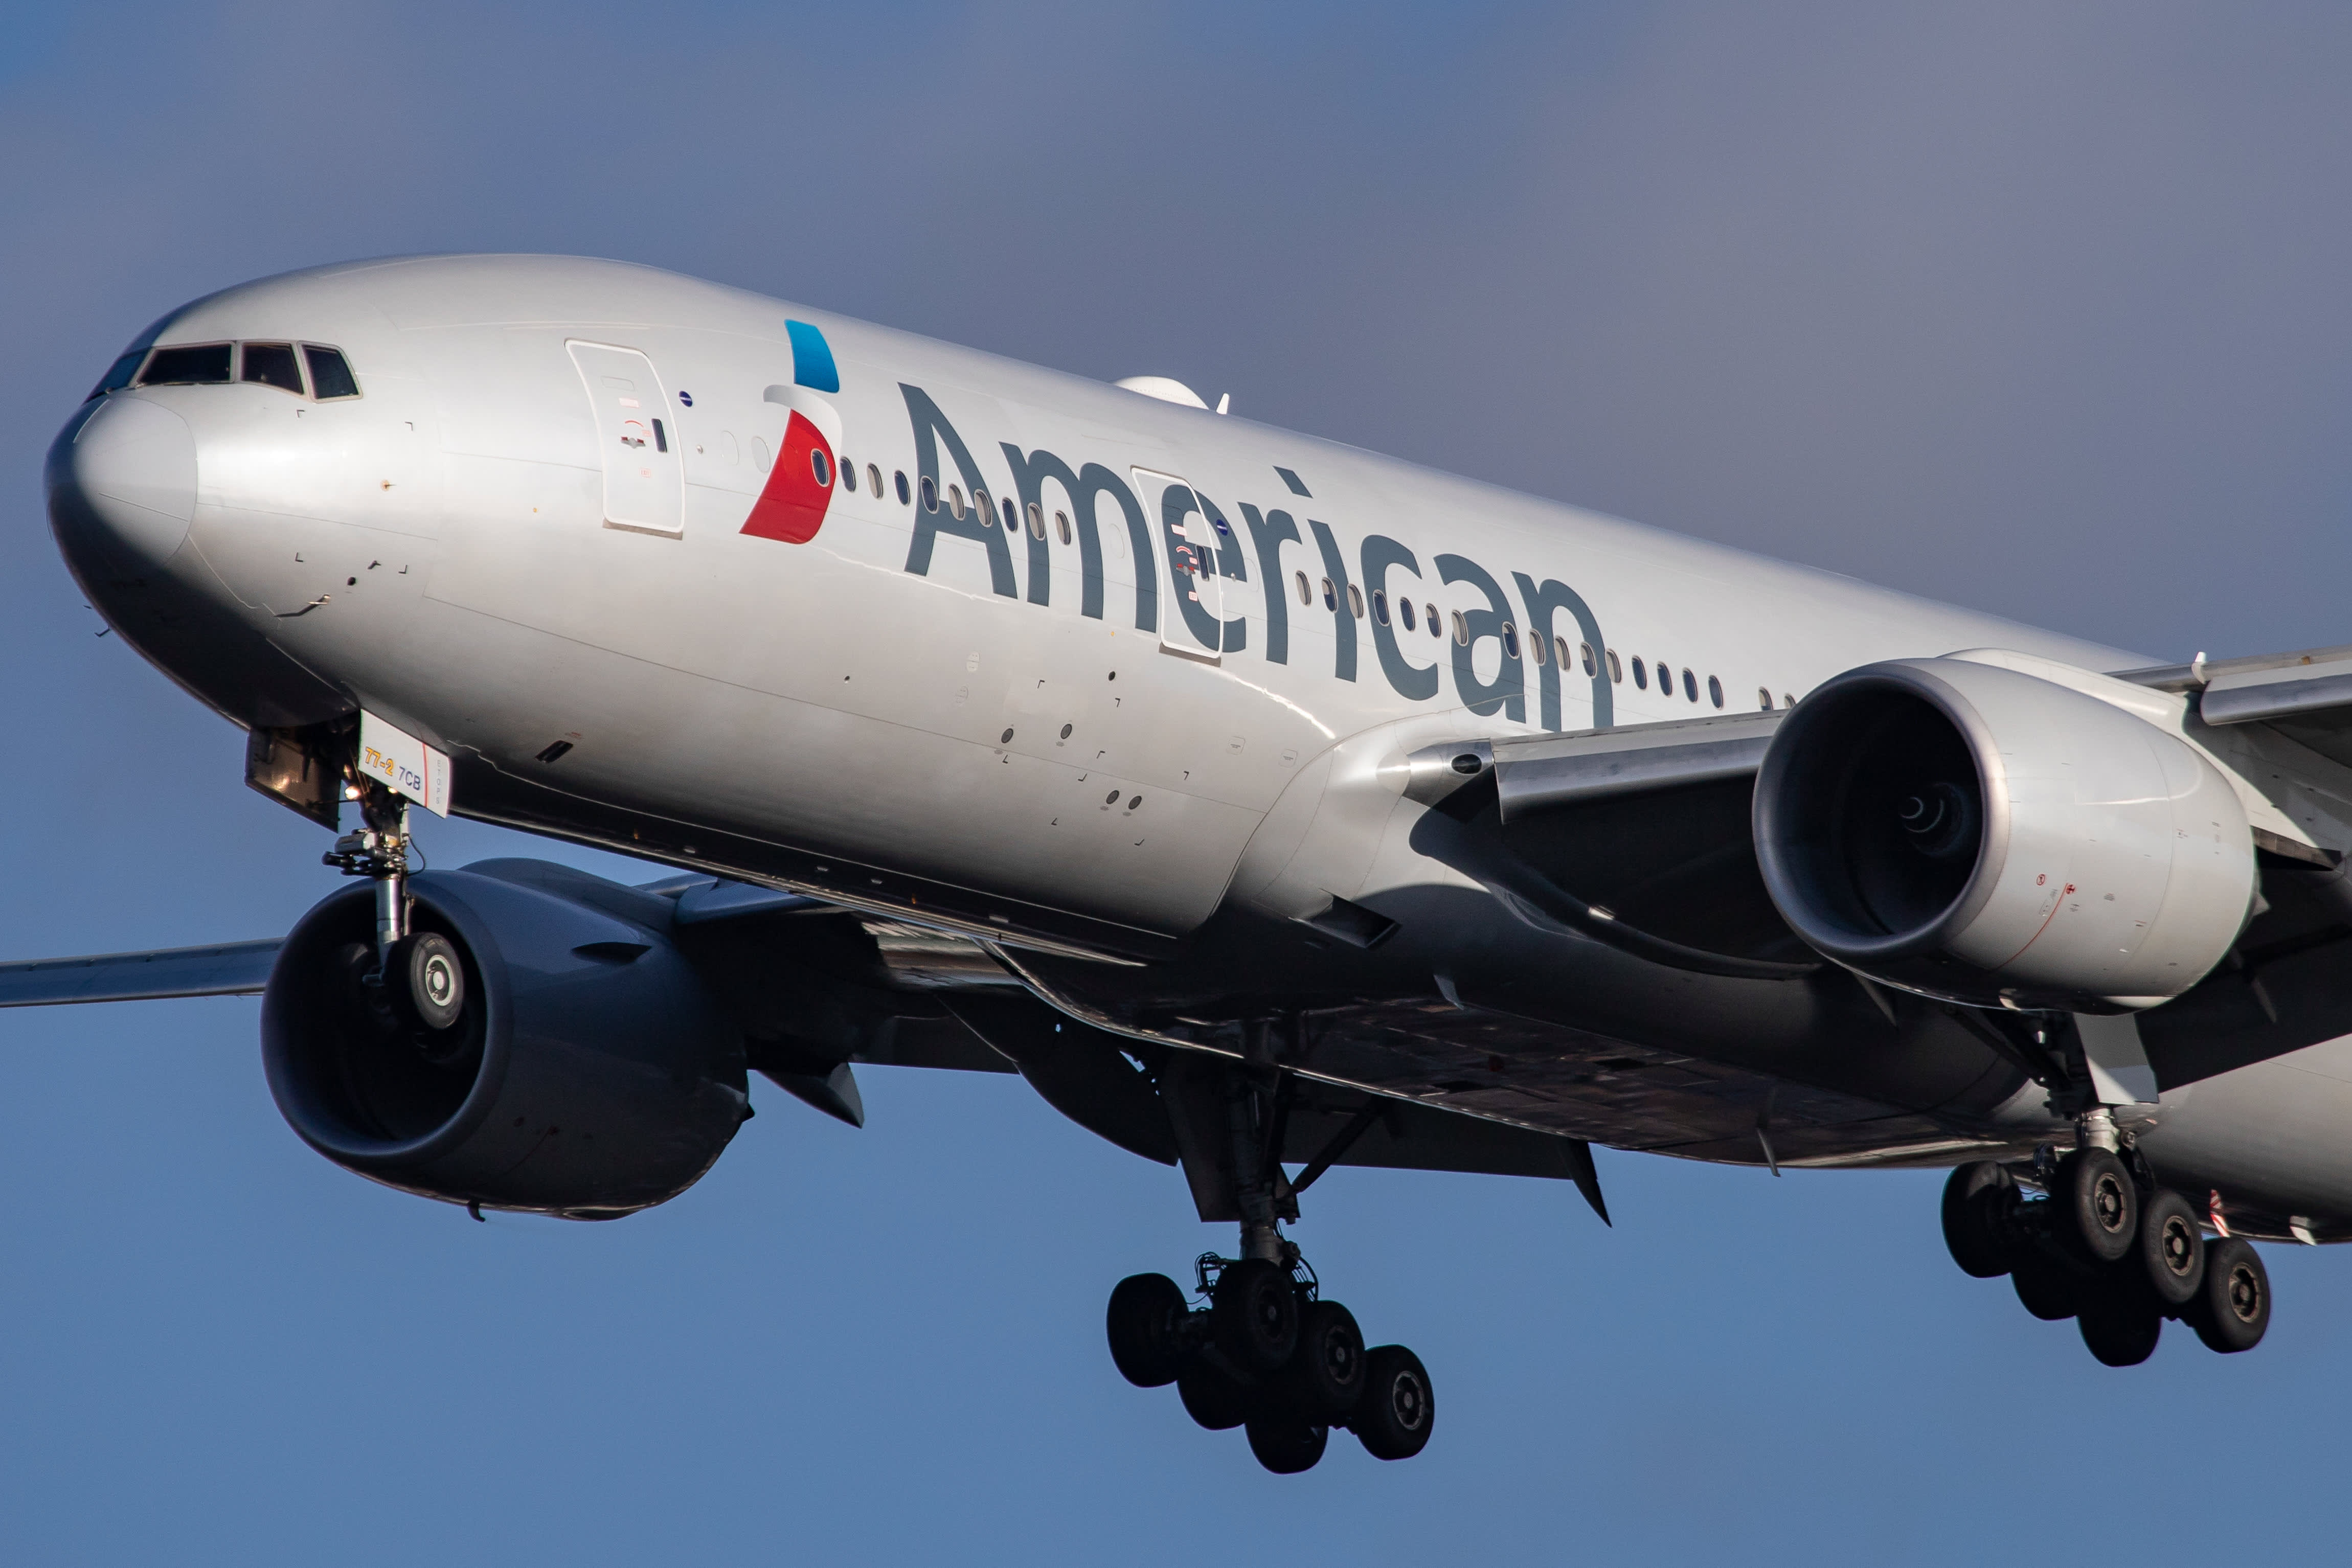 American Airlines London-bound flight turns back to Miami after passenger